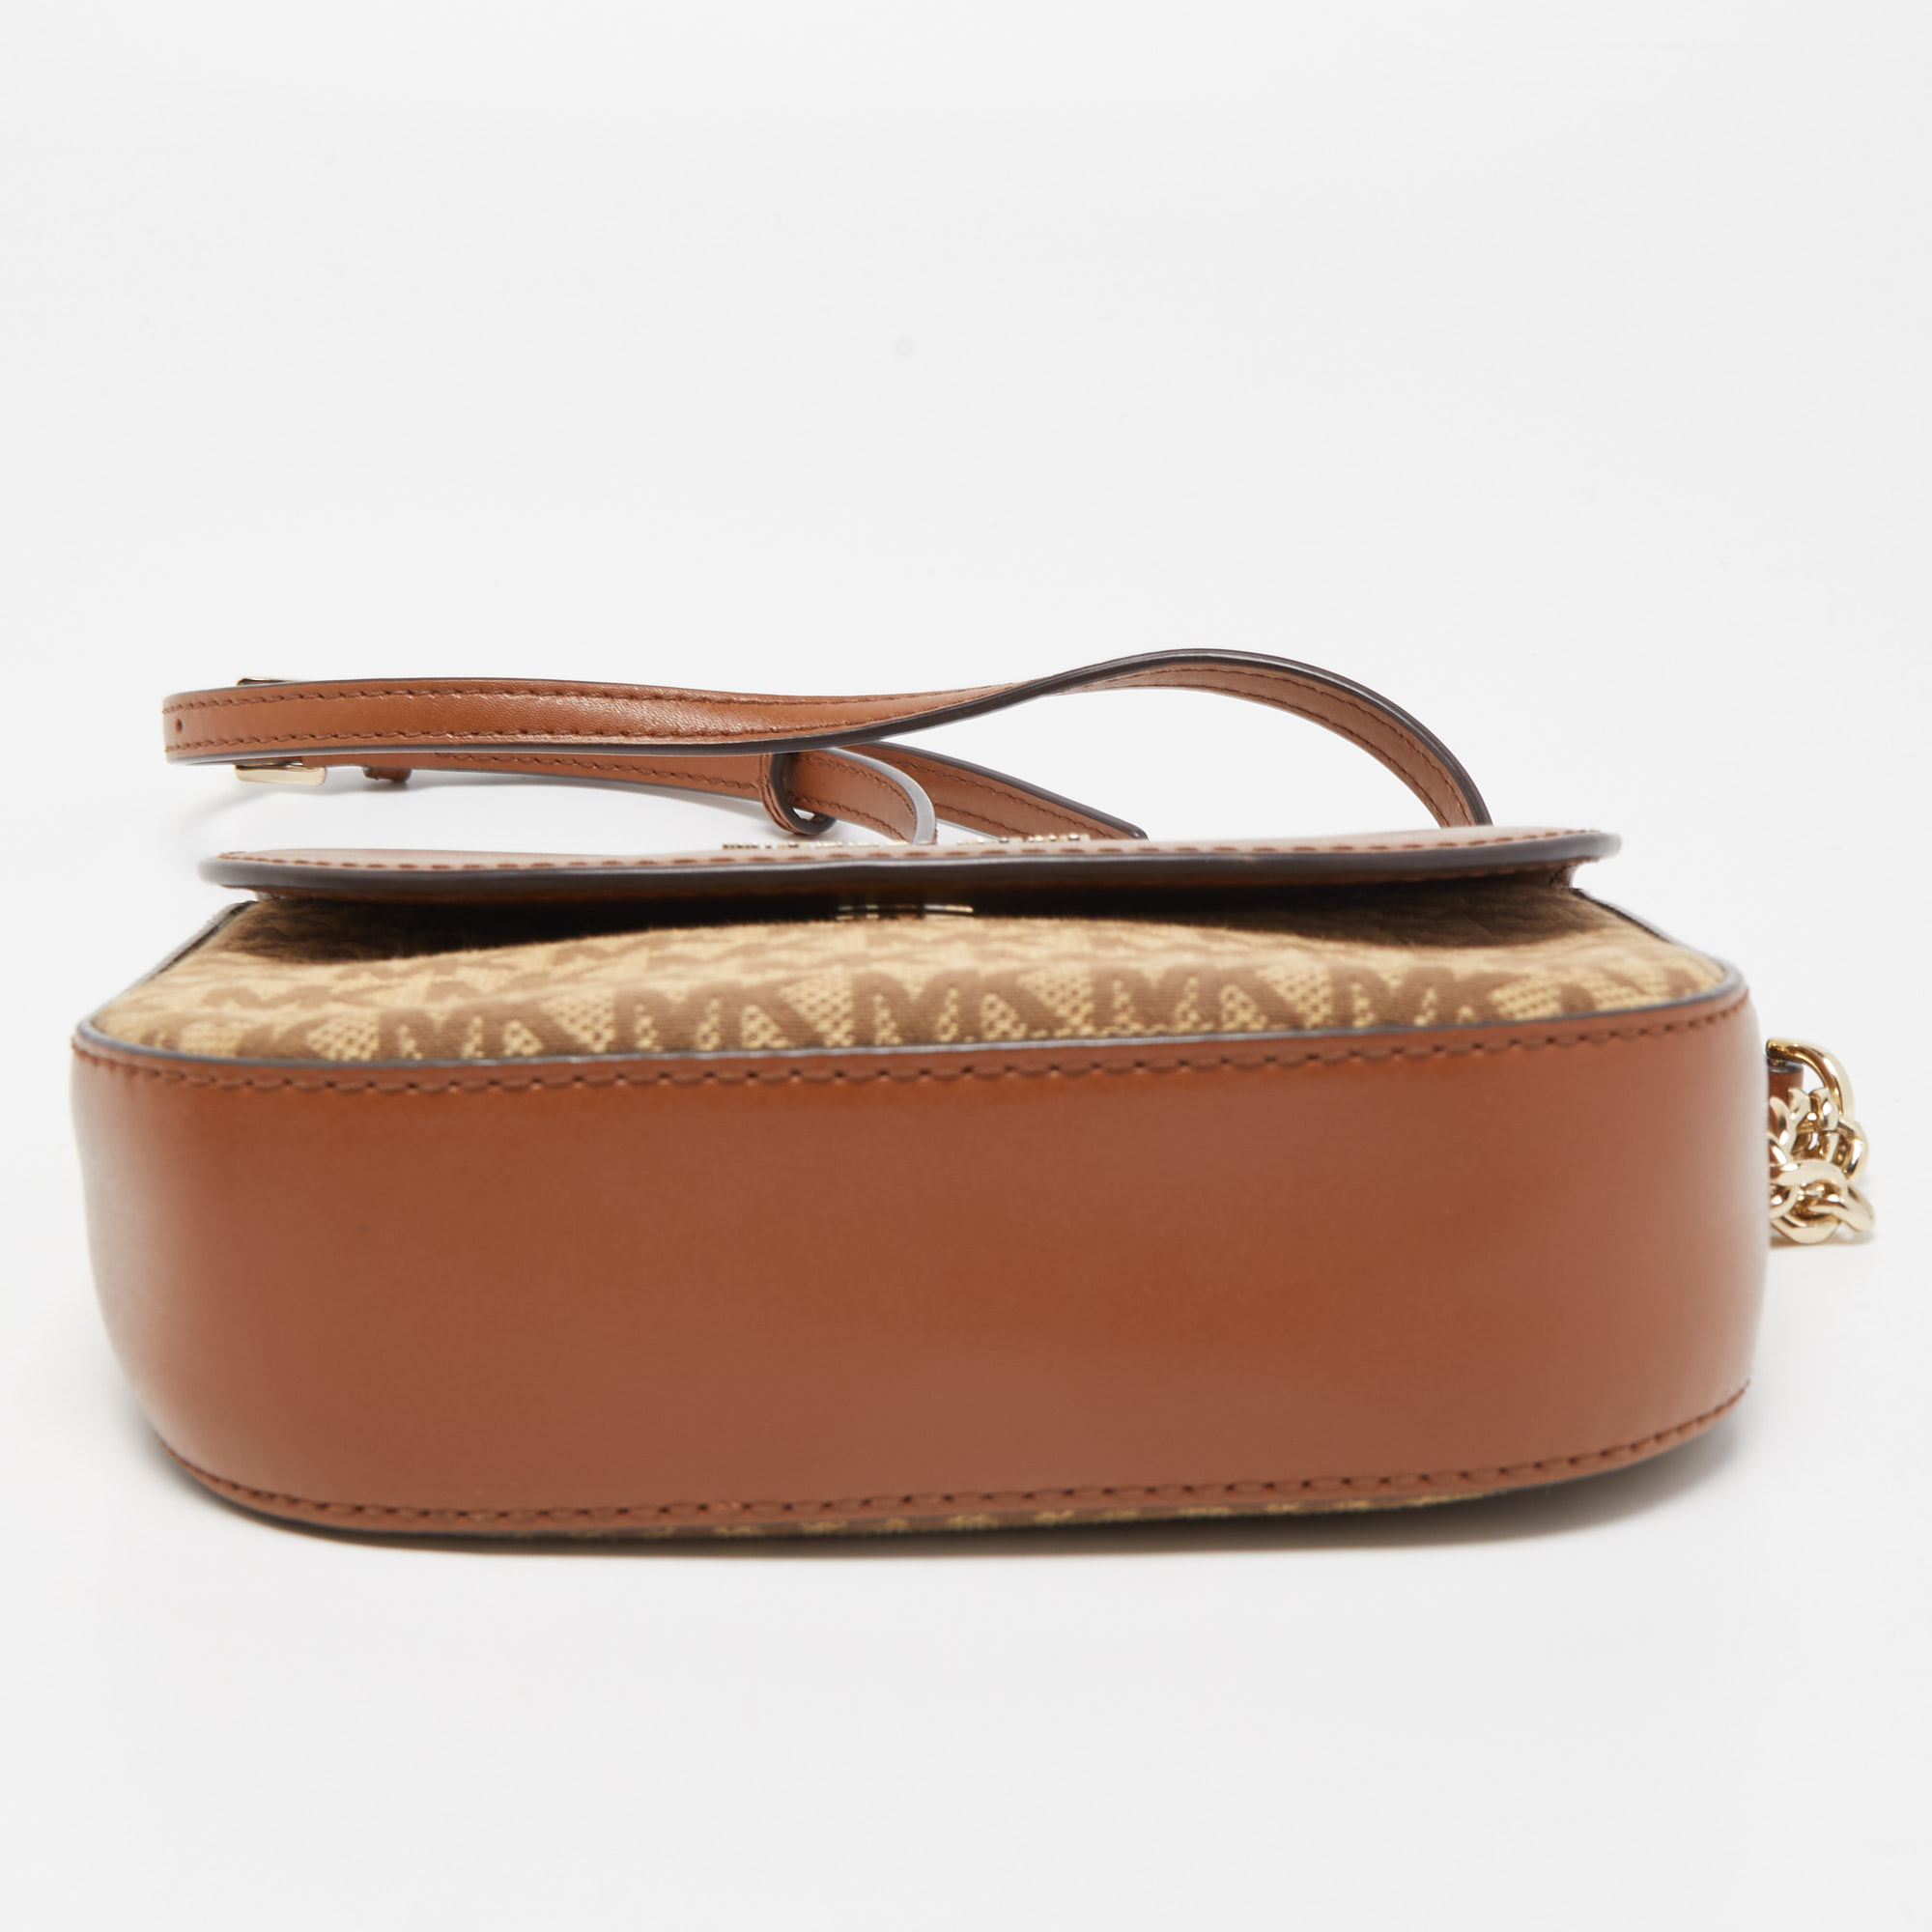 Michael Kors Brown/Beige Signature Canvas And Faux Leather Dome Crossbody Bag